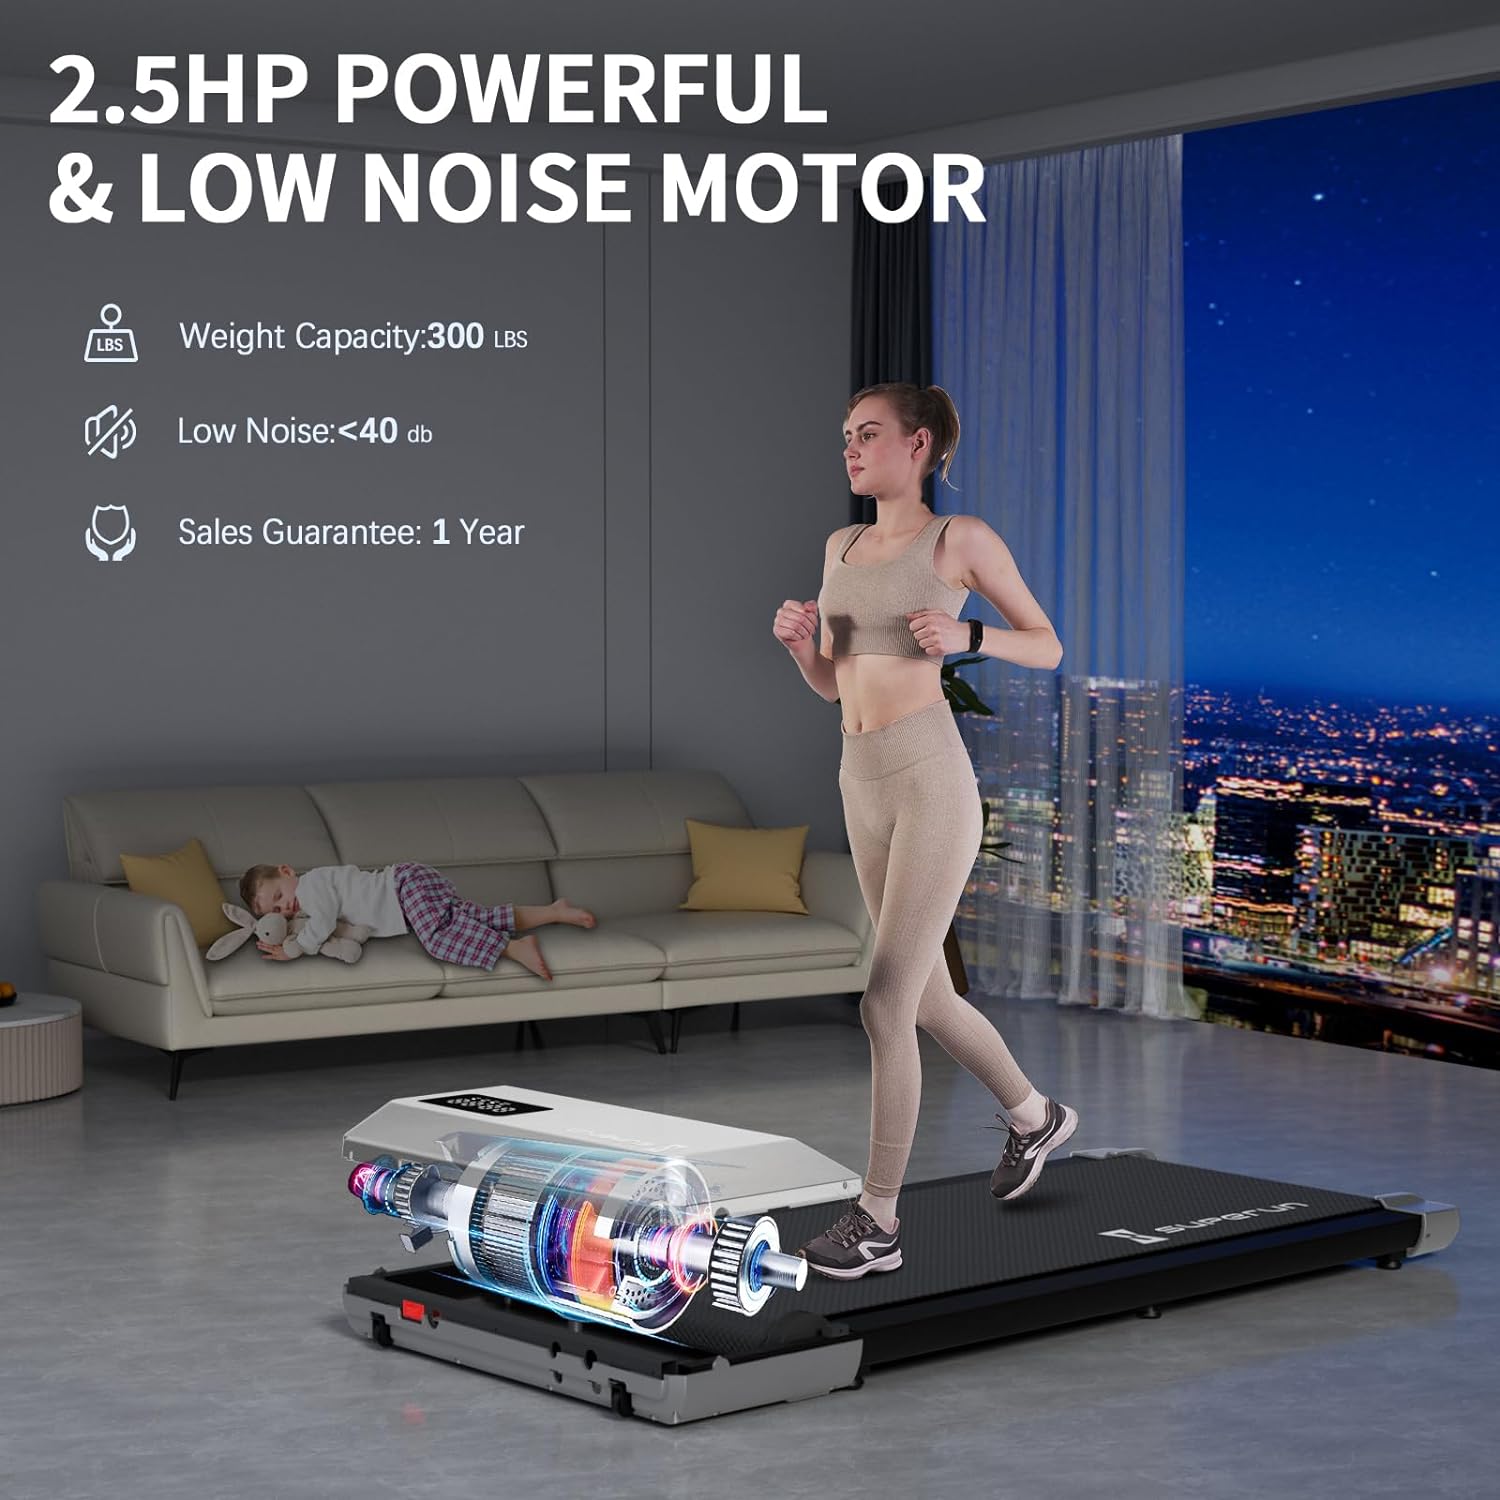 SupeRun 2 in 1 Under Desk Treadmill, Low Noise Compact Walking Pad with Remote Control, 2.5 HP Portable Treadmill Desk Workstation with 300lbs Capacity, LED Display, Sliver